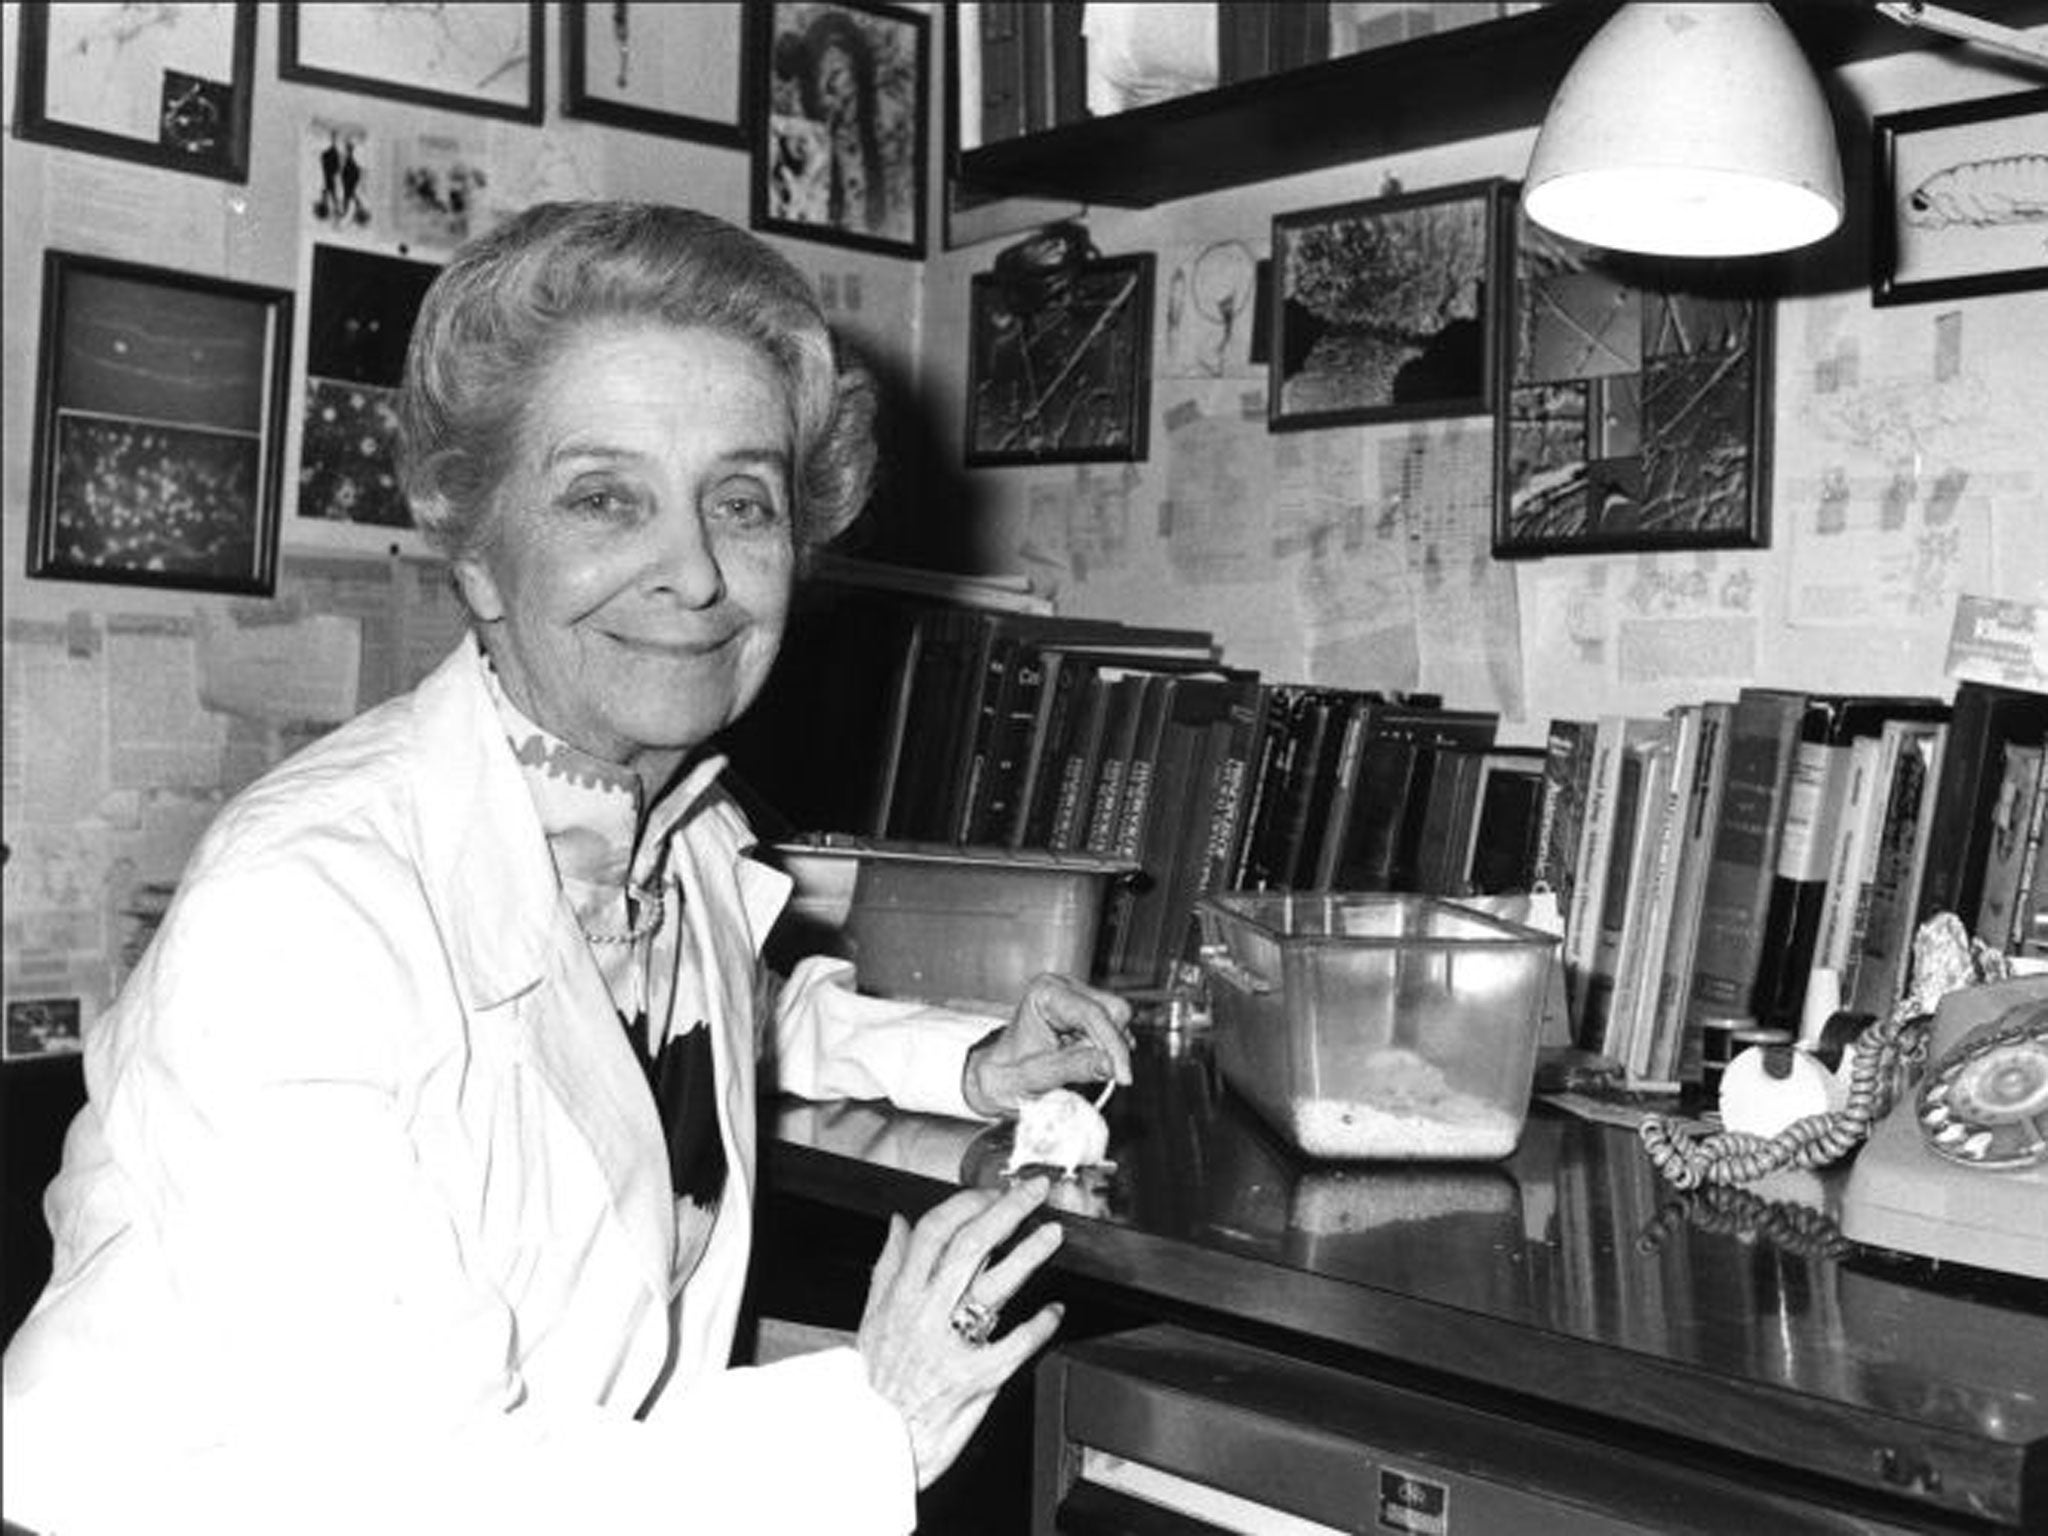 Levi-Montalcini: she attributed her success partly to ‘the habit of underestimating obstacles’